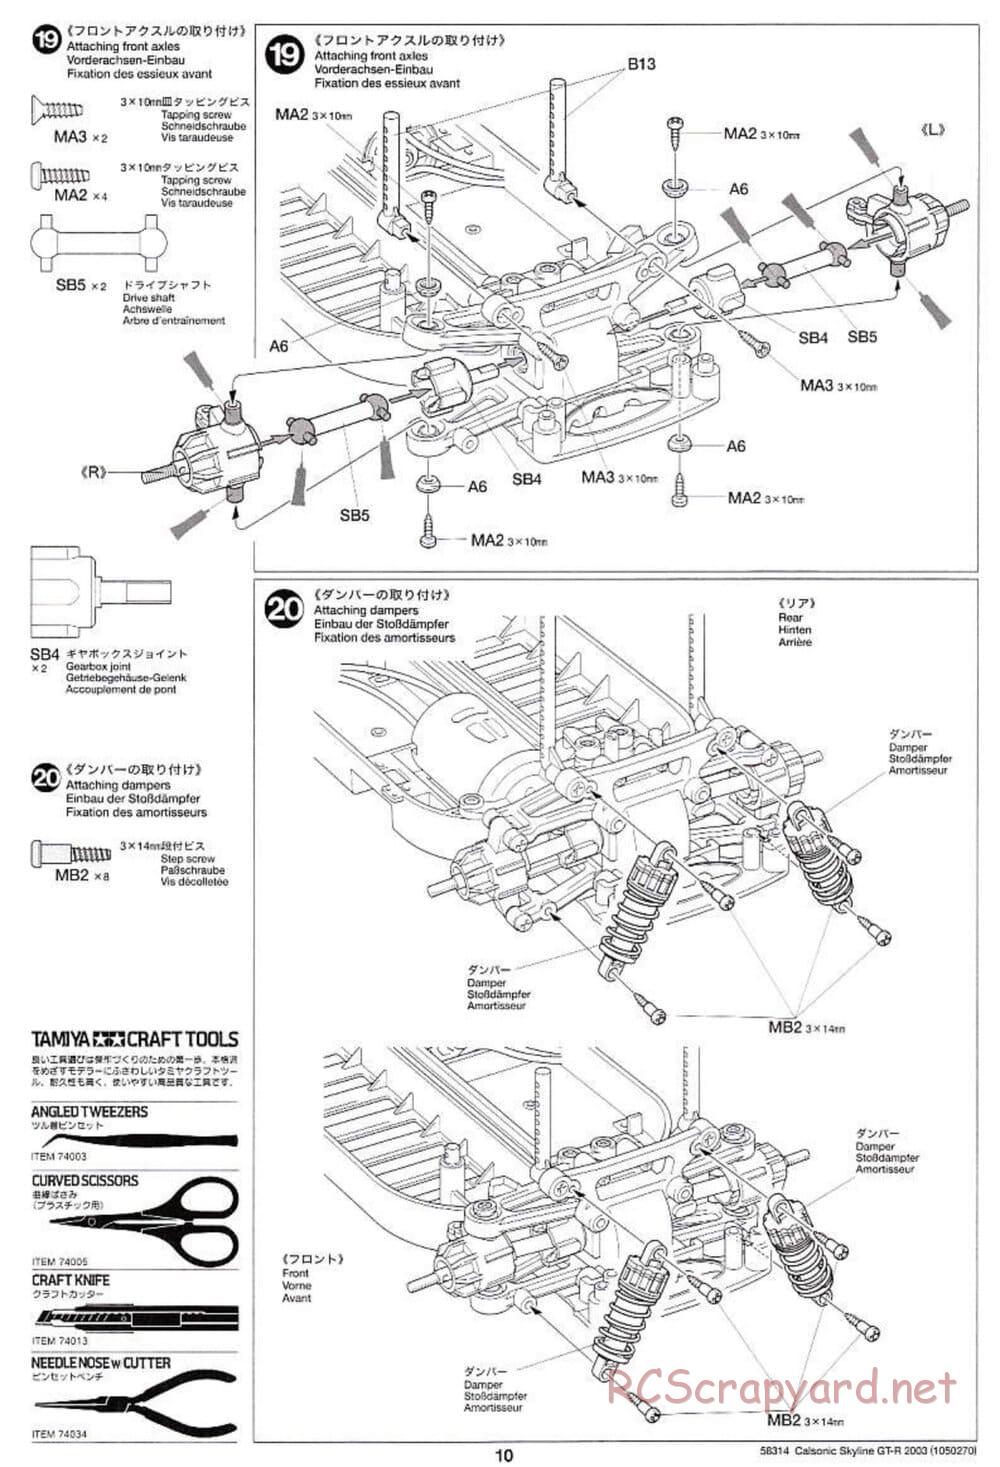 Tamiya - Calsonic Skyline GT-R 2003 - TT-01 Chassis - Manual - Page 10